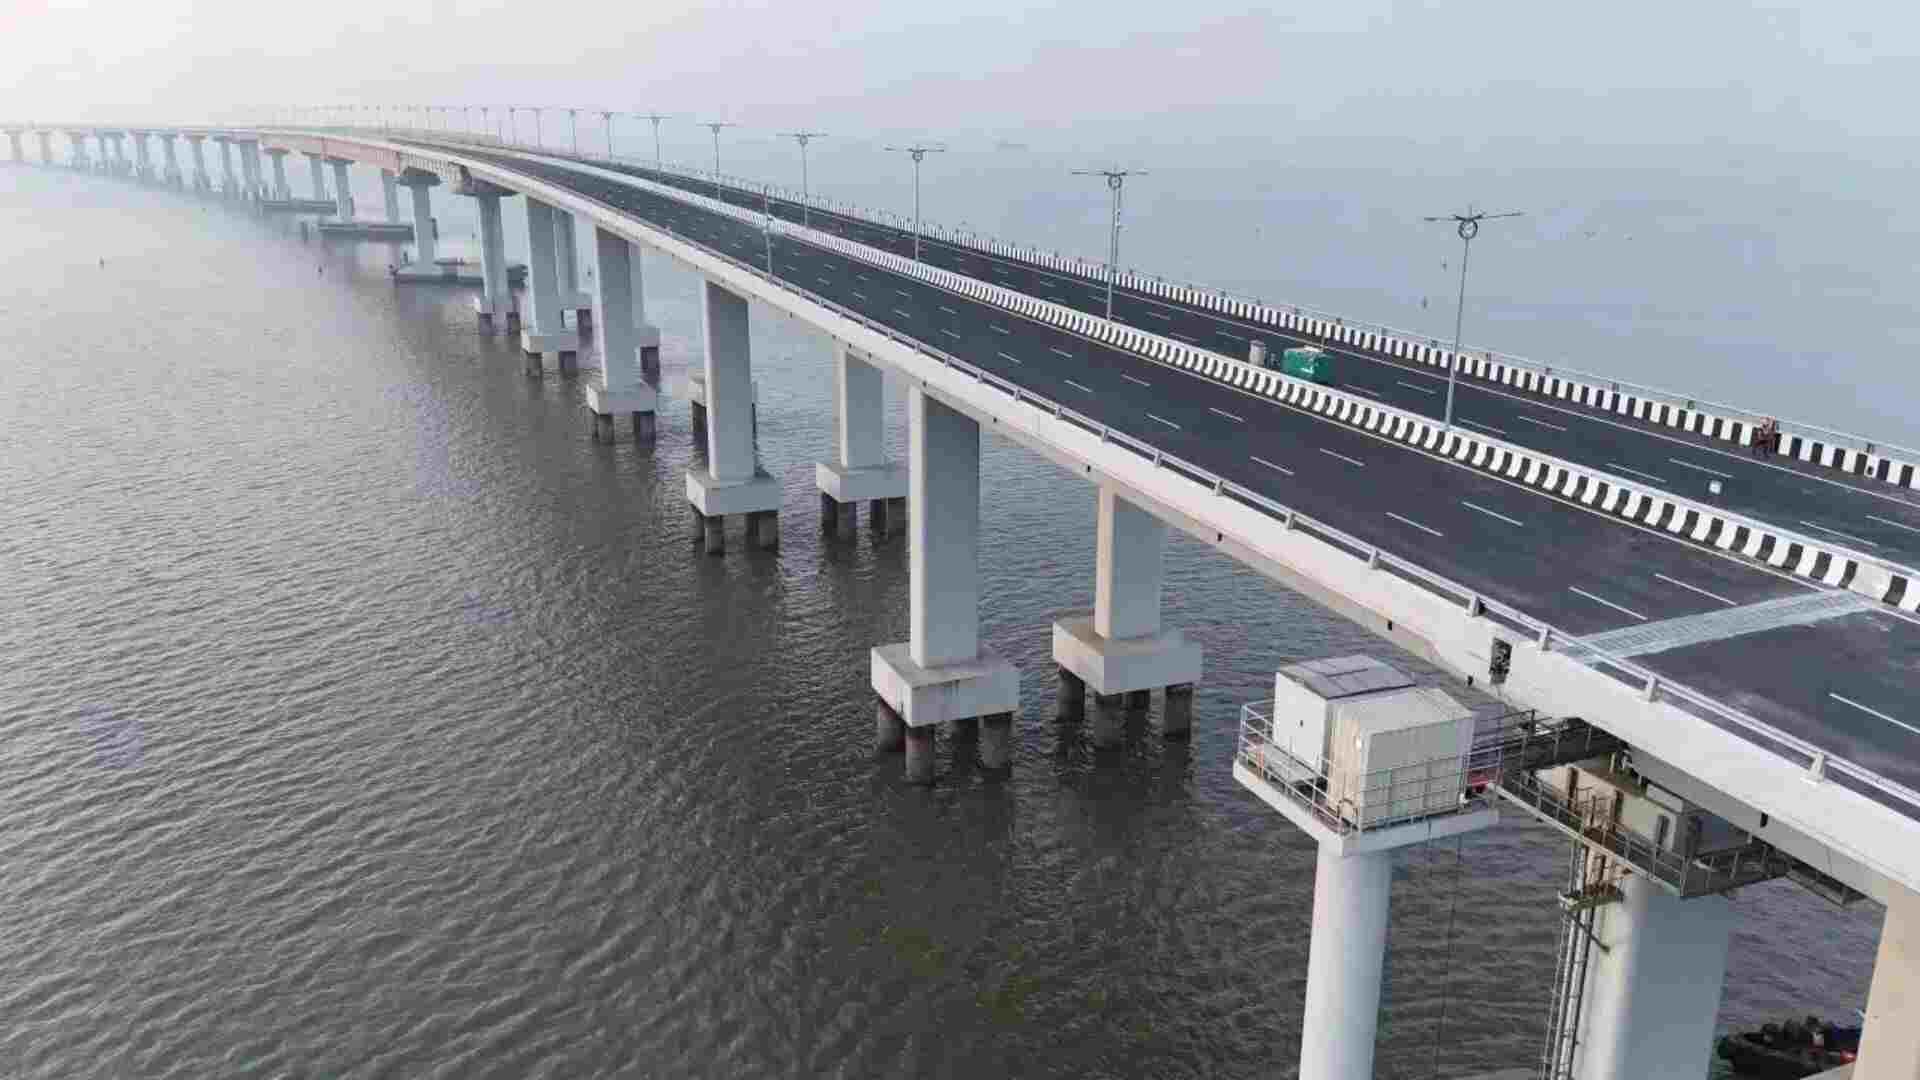 38-Year-Old Engineer Jumps From Atal Setu, Search Underway To Find Him